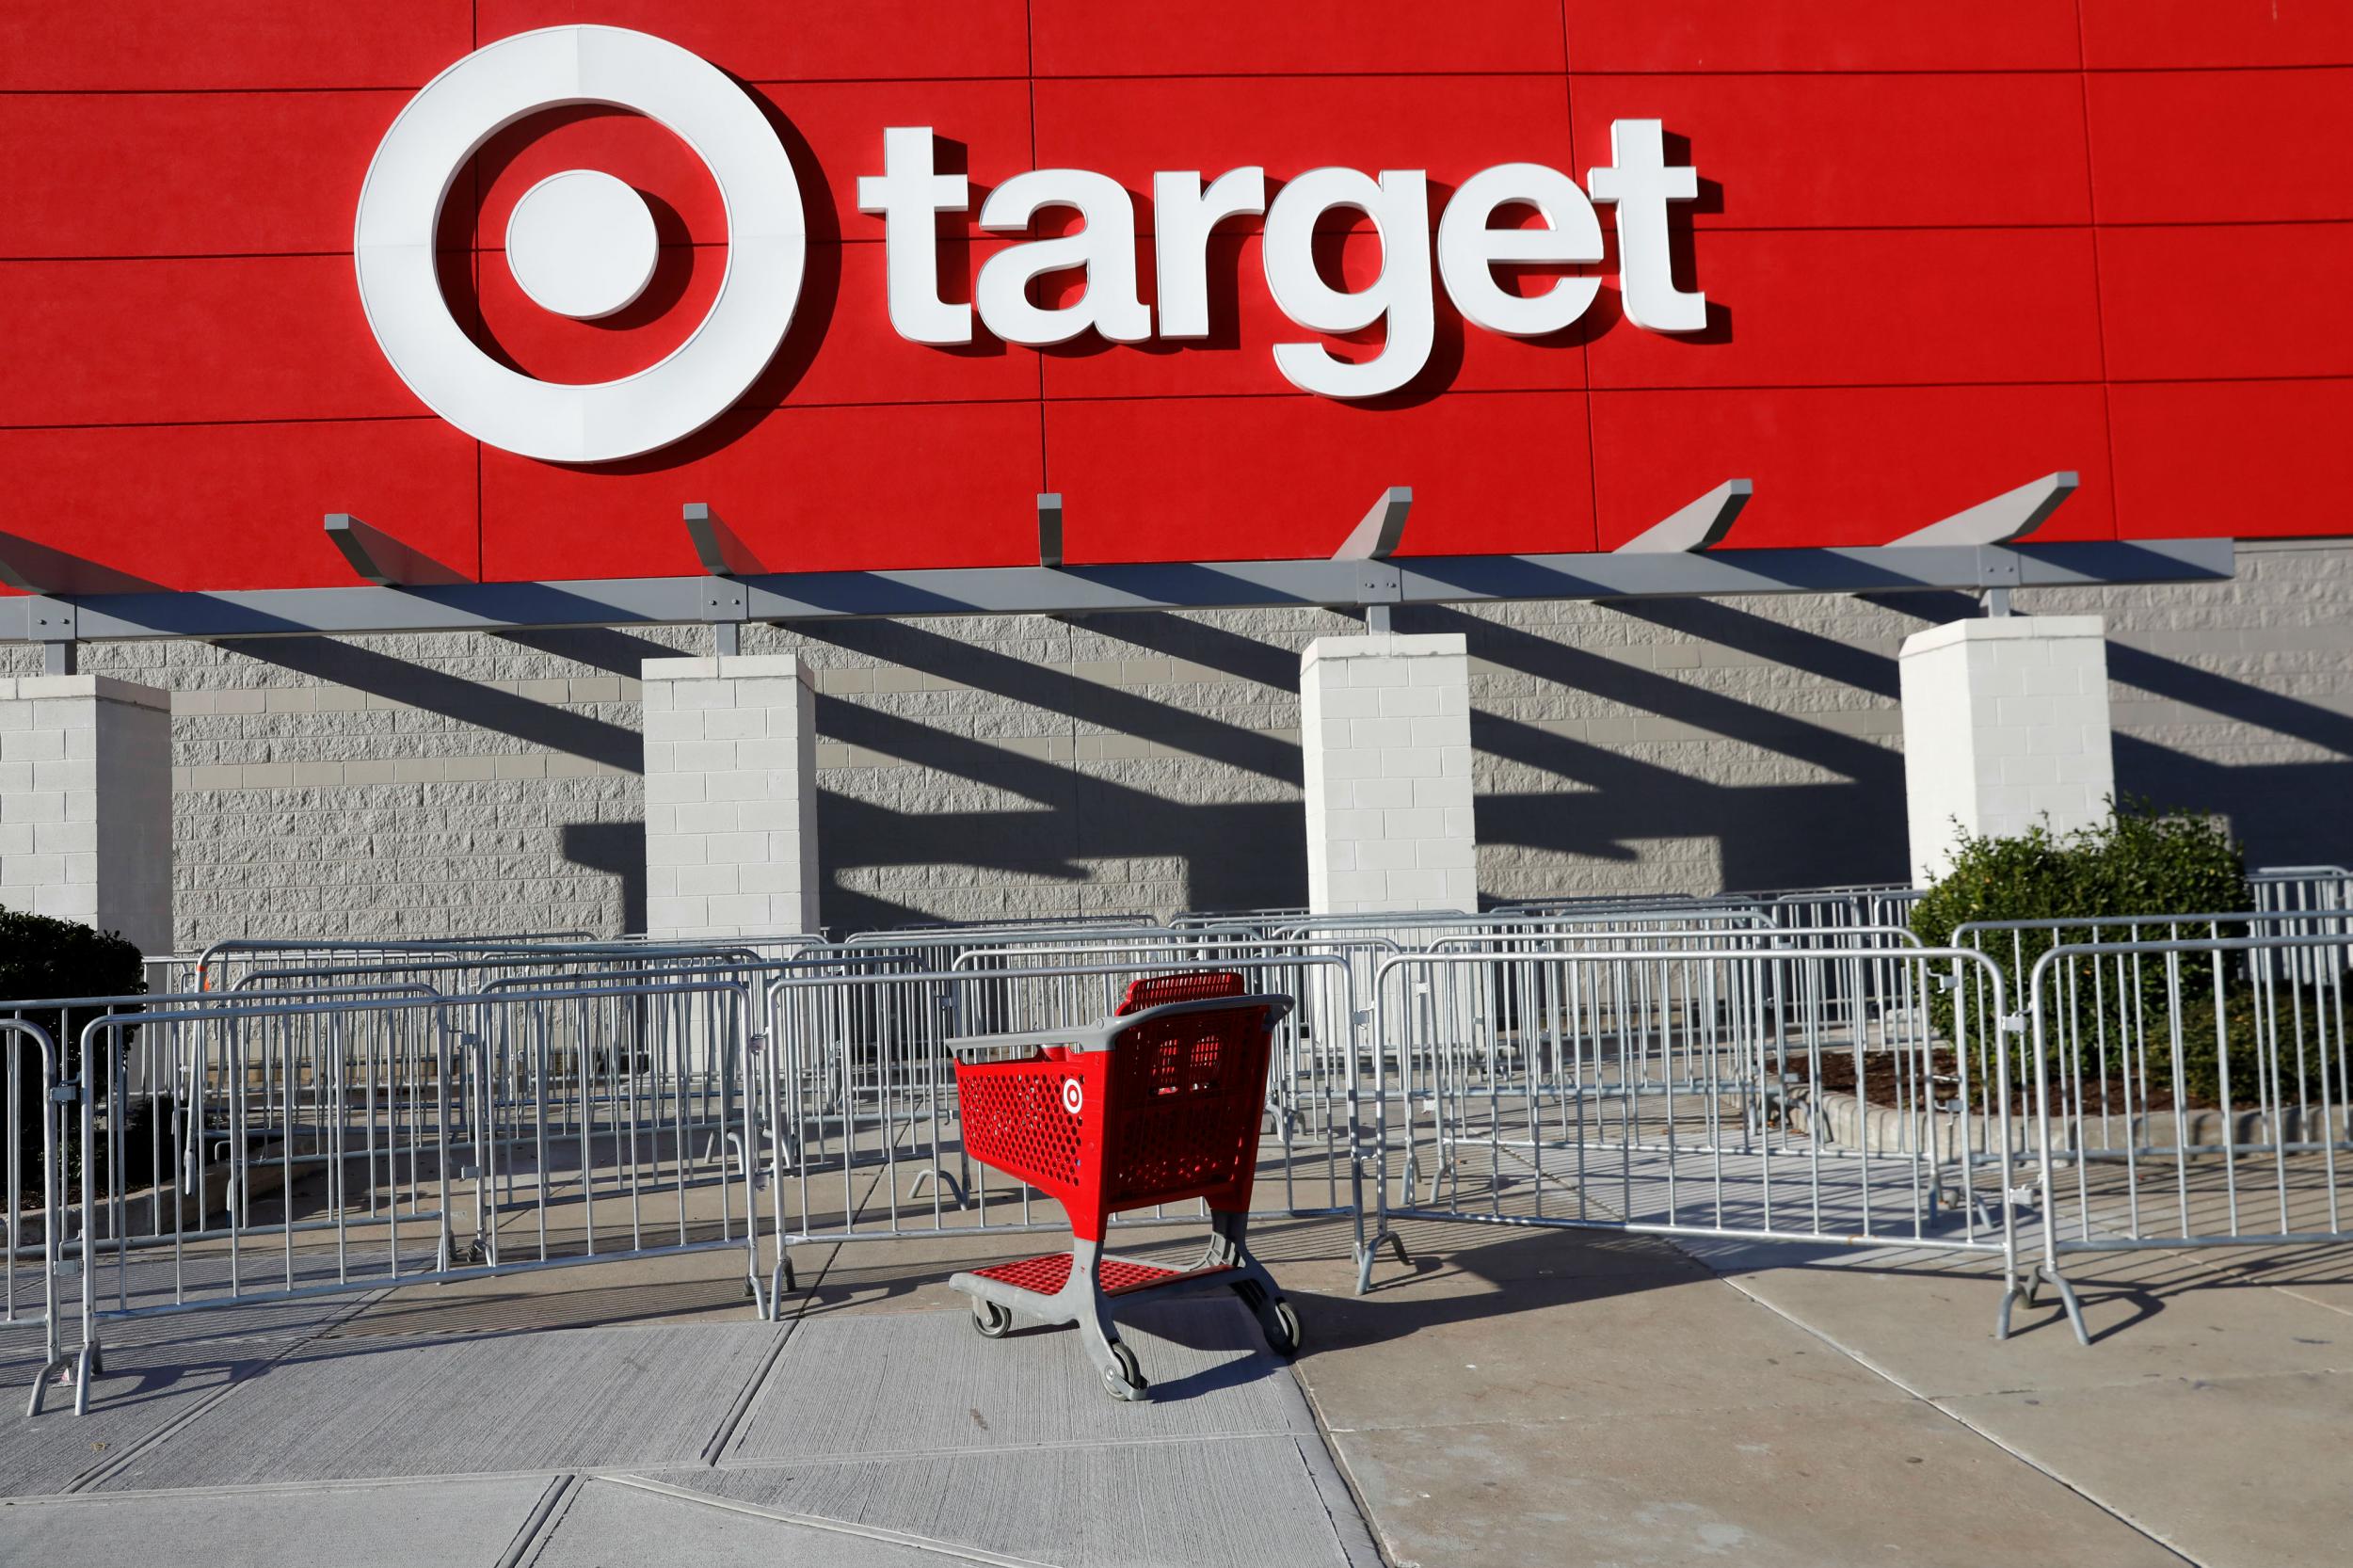 Listeria contamination: Sandwiches and salads sold at Target recalled amid fears of potential infection